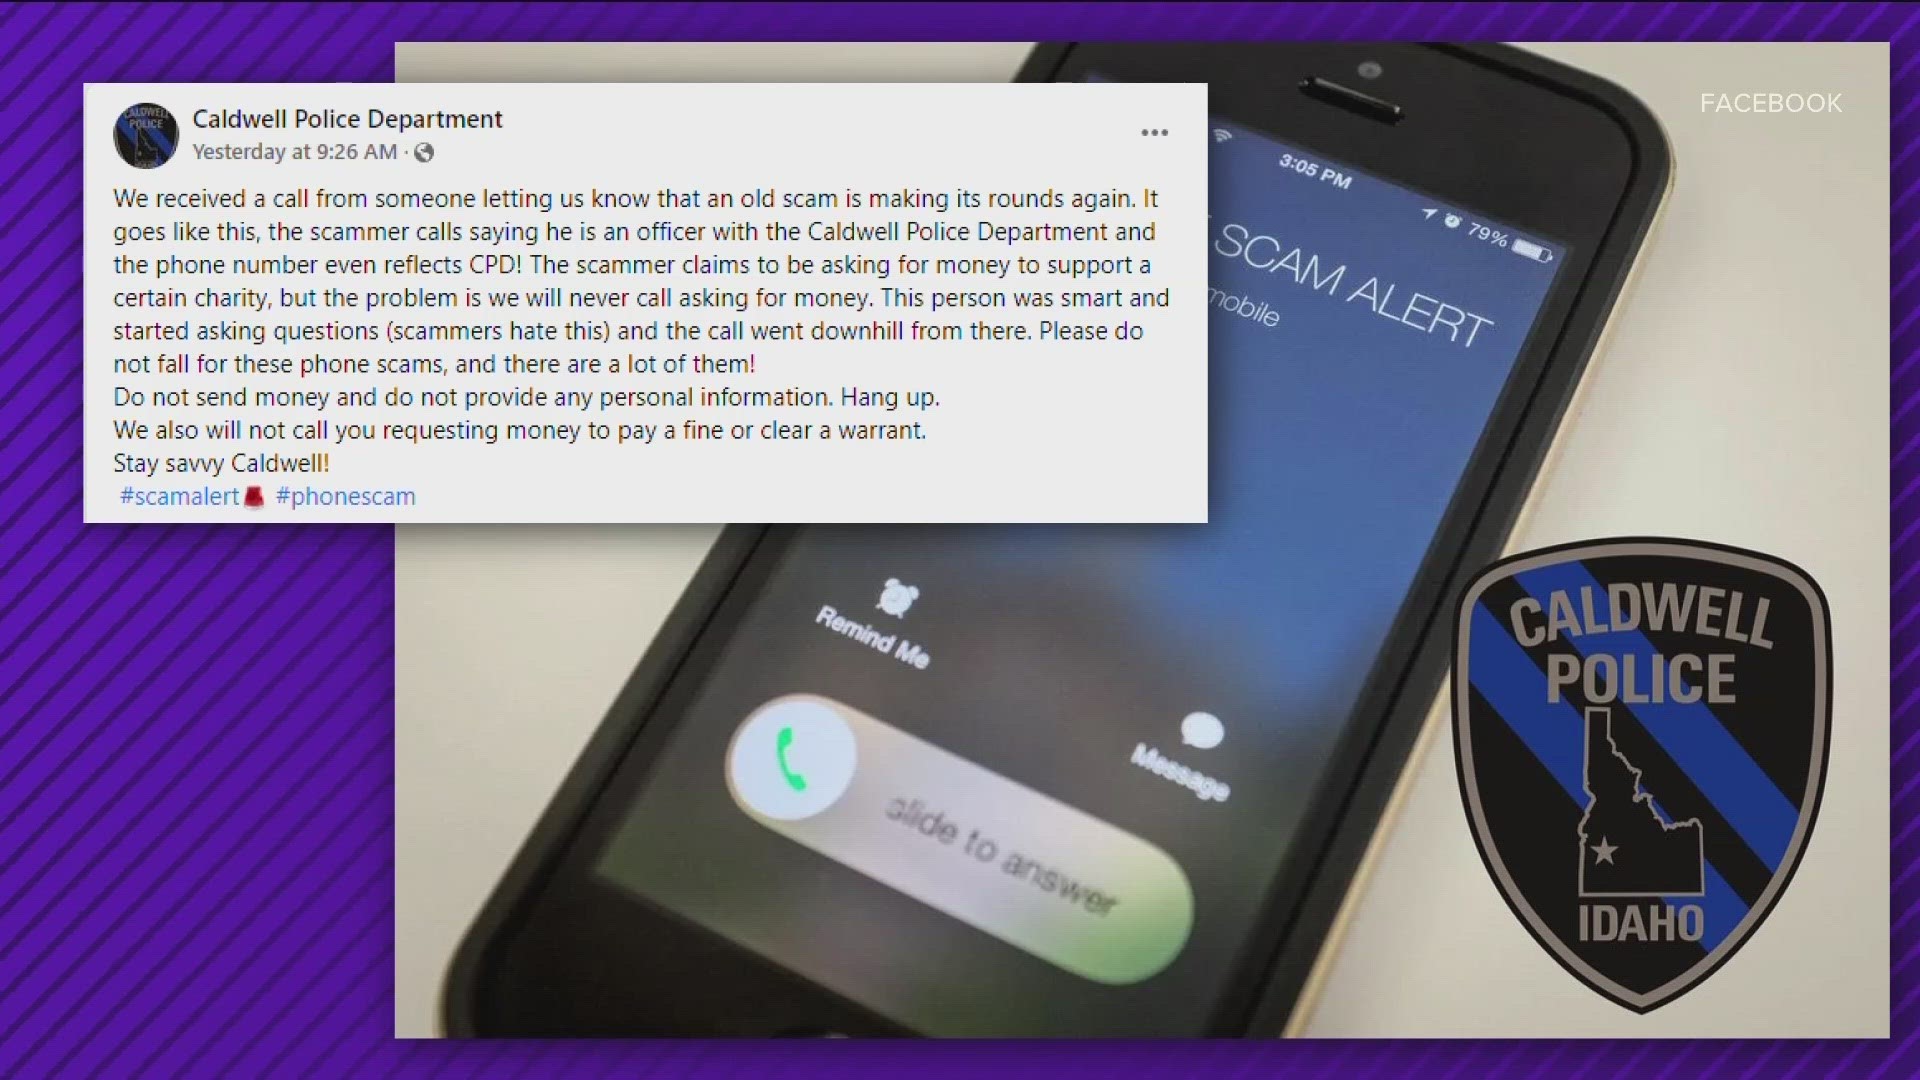 The scam phone call comes from a number reflecting the Caldwell Police Department and asks people to donate money to charity.